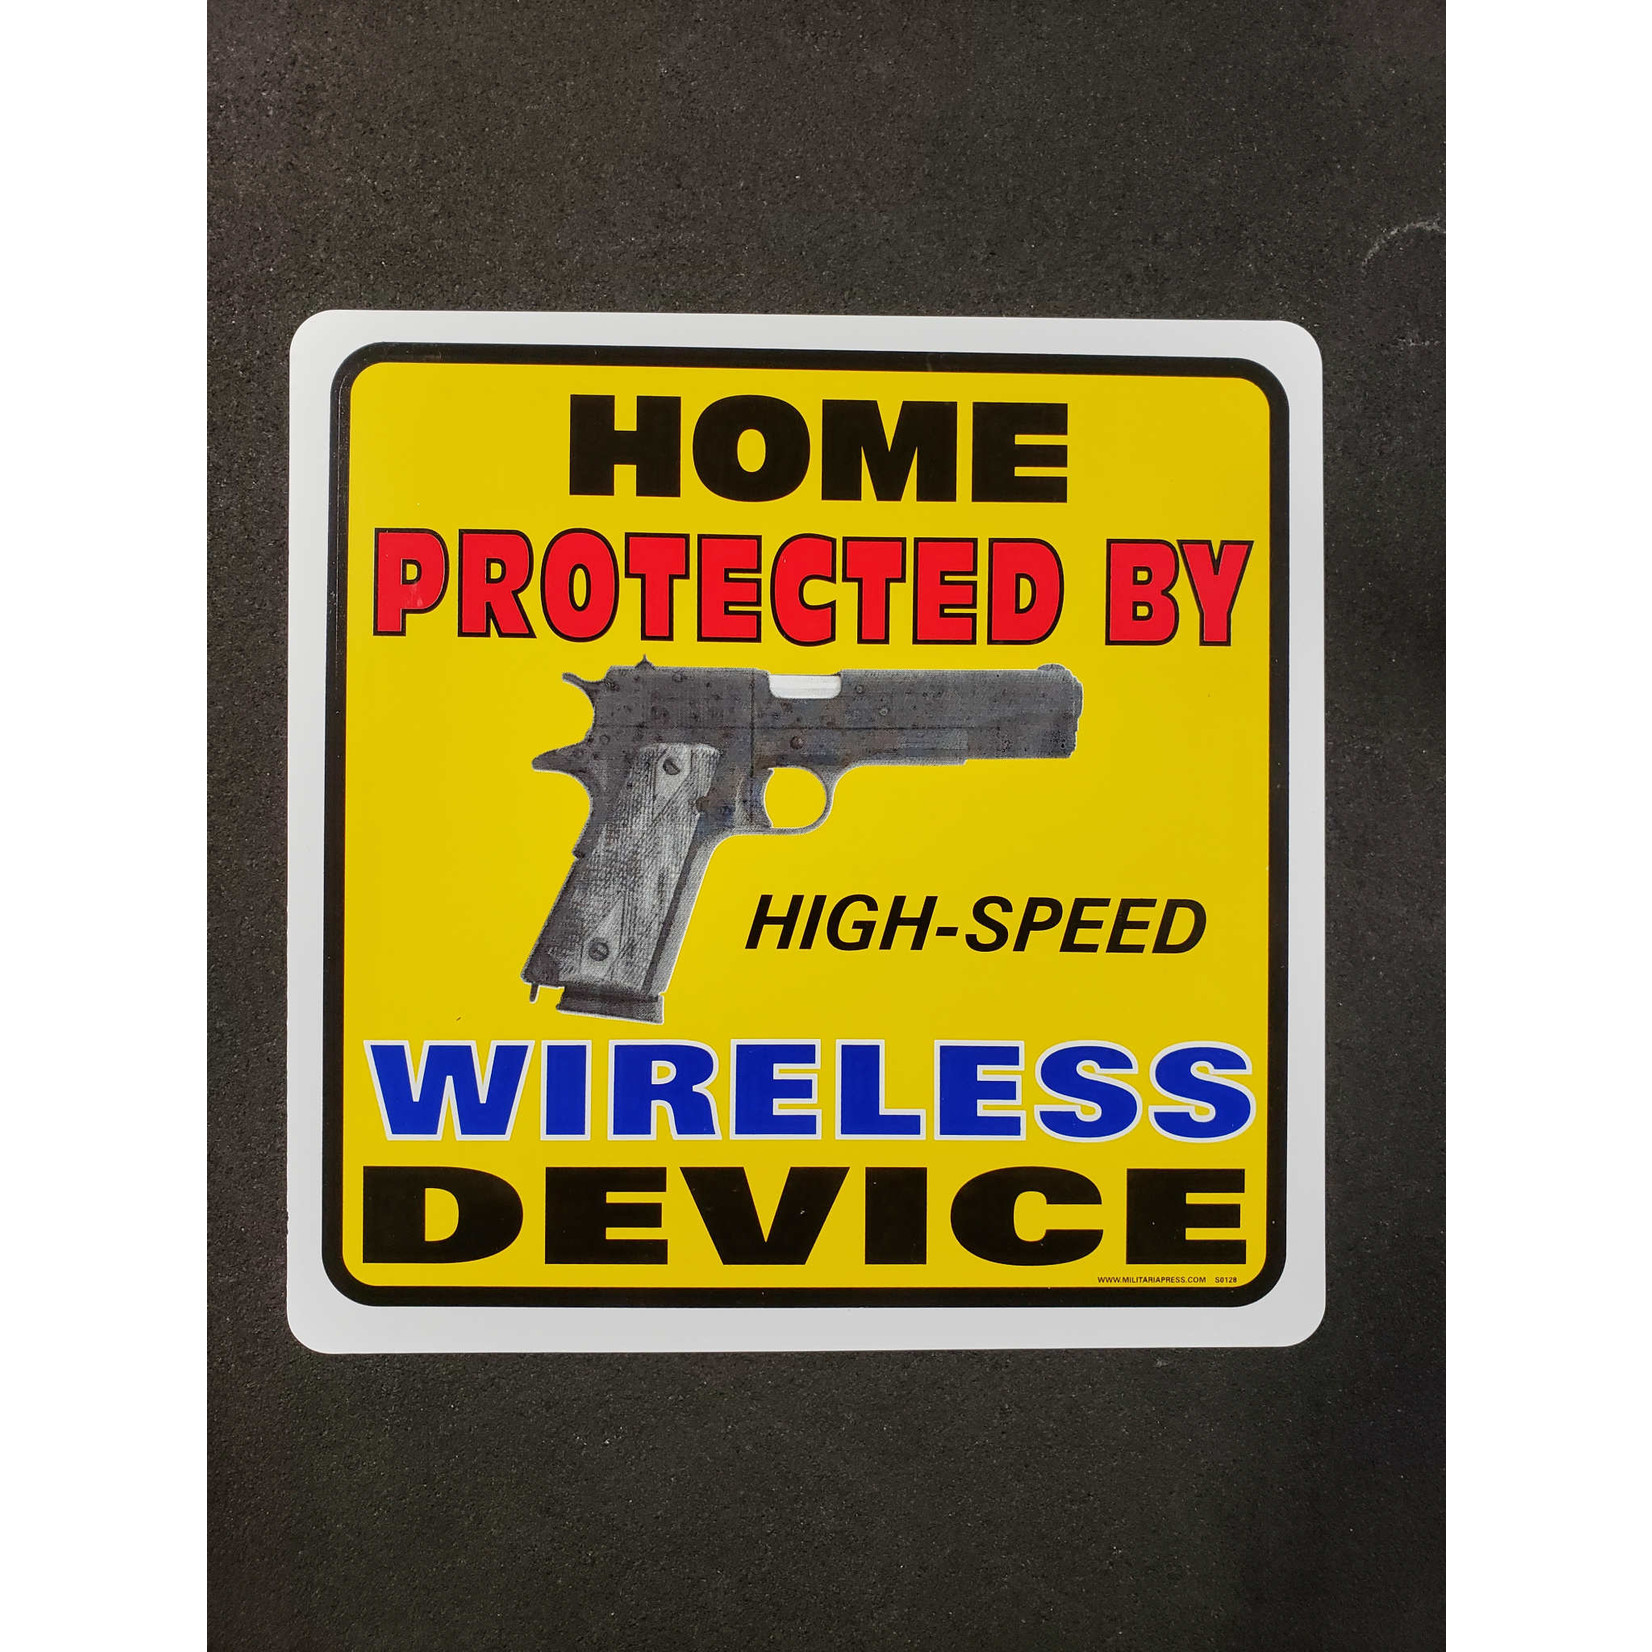 Home Protected by High-Speed Wireless Device Yard Sign 